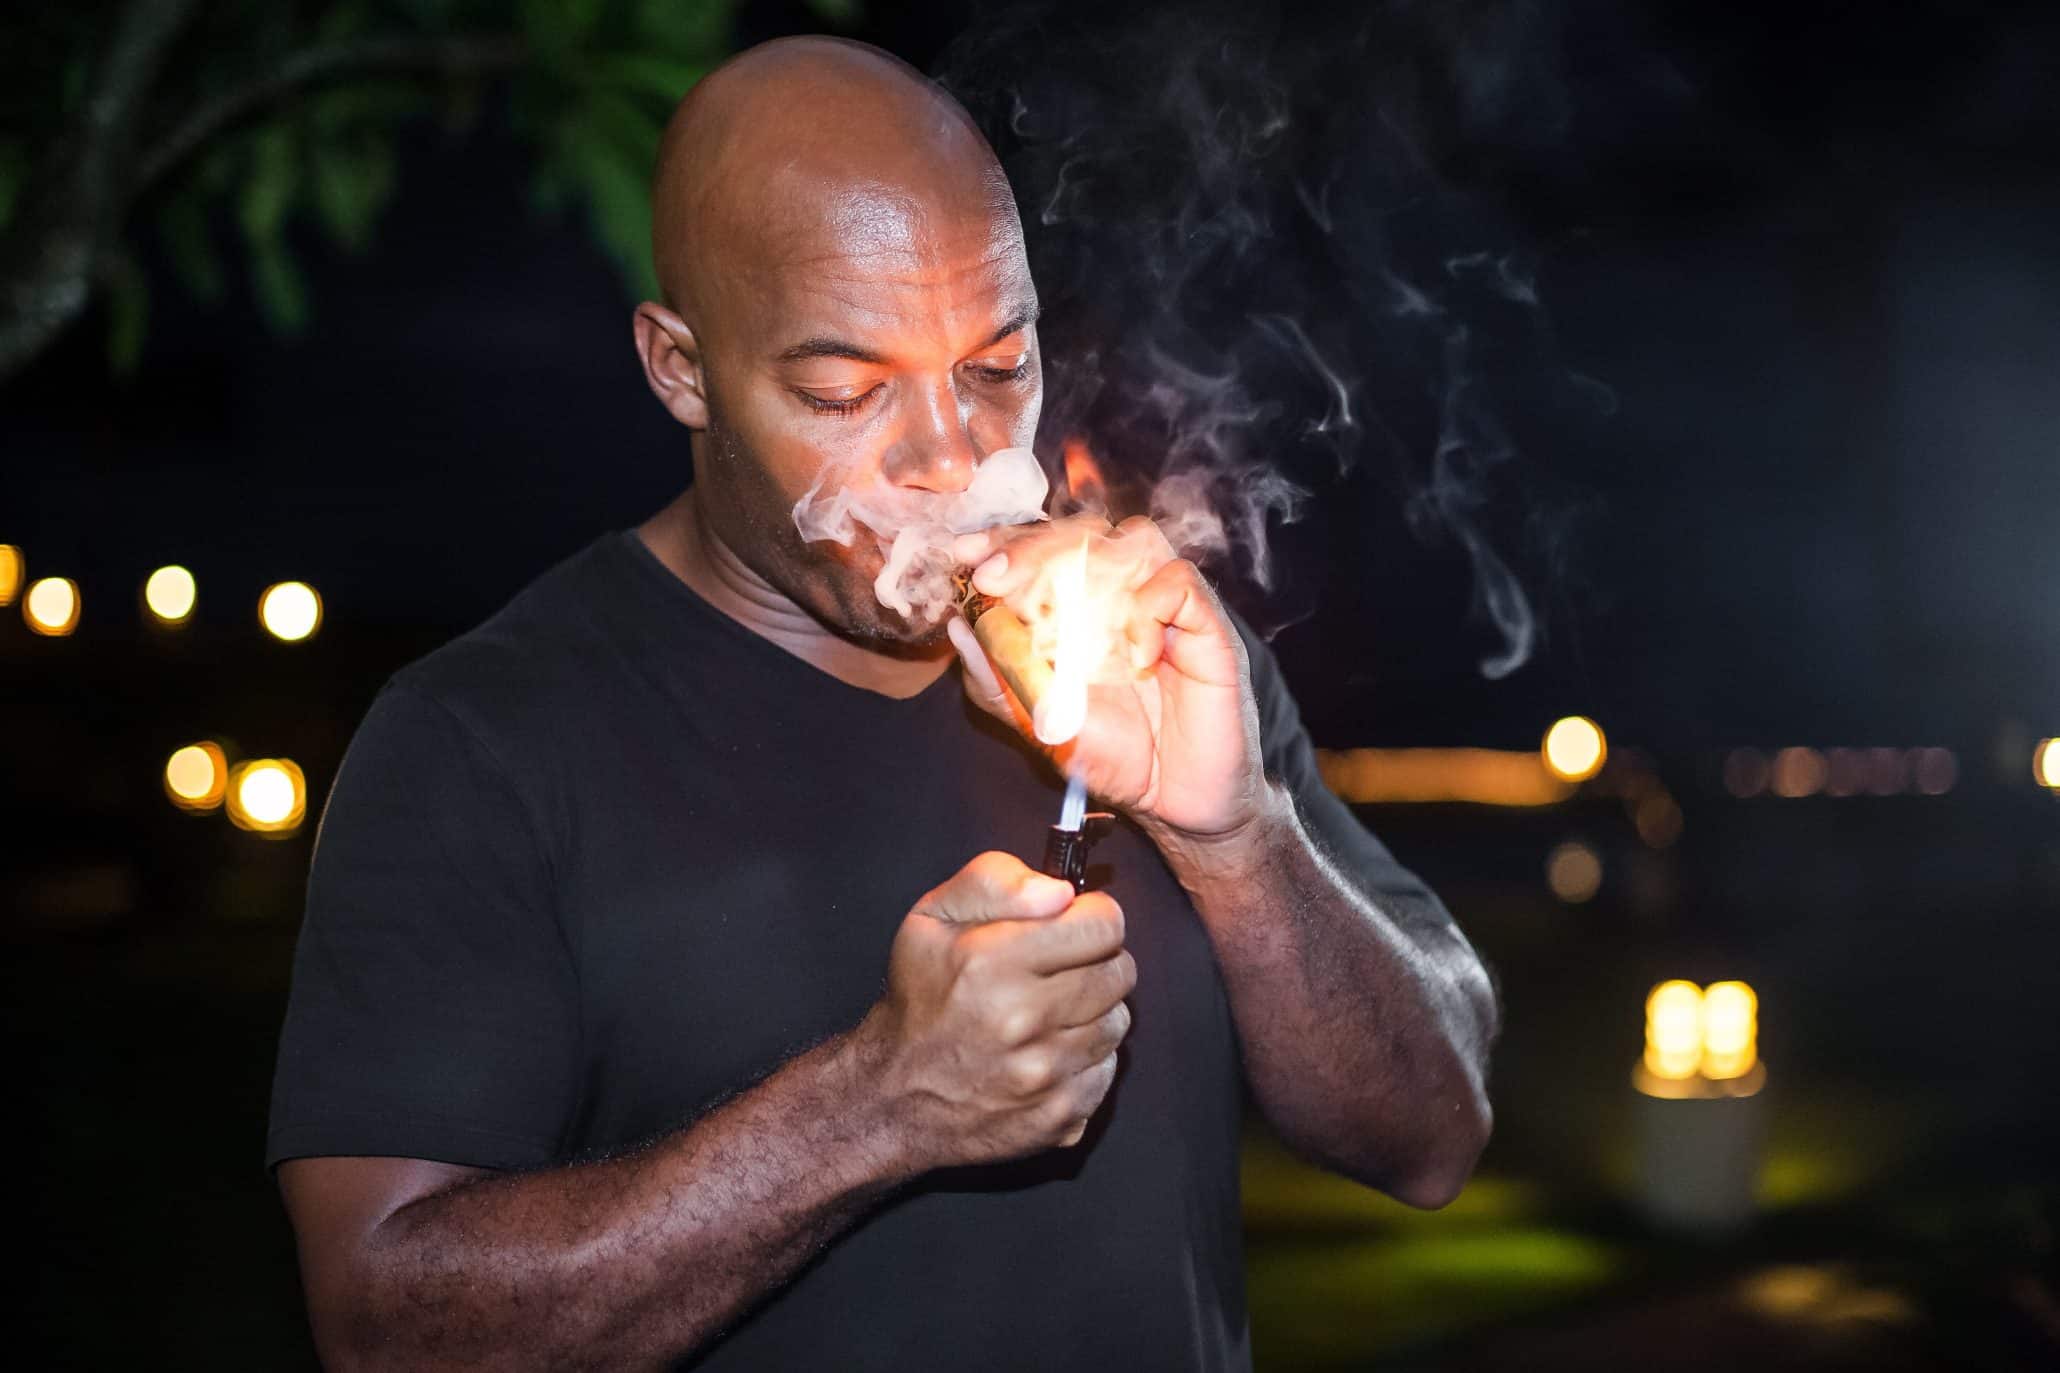 Dean Parsons, founder of Epic cigars, lights a smoke.